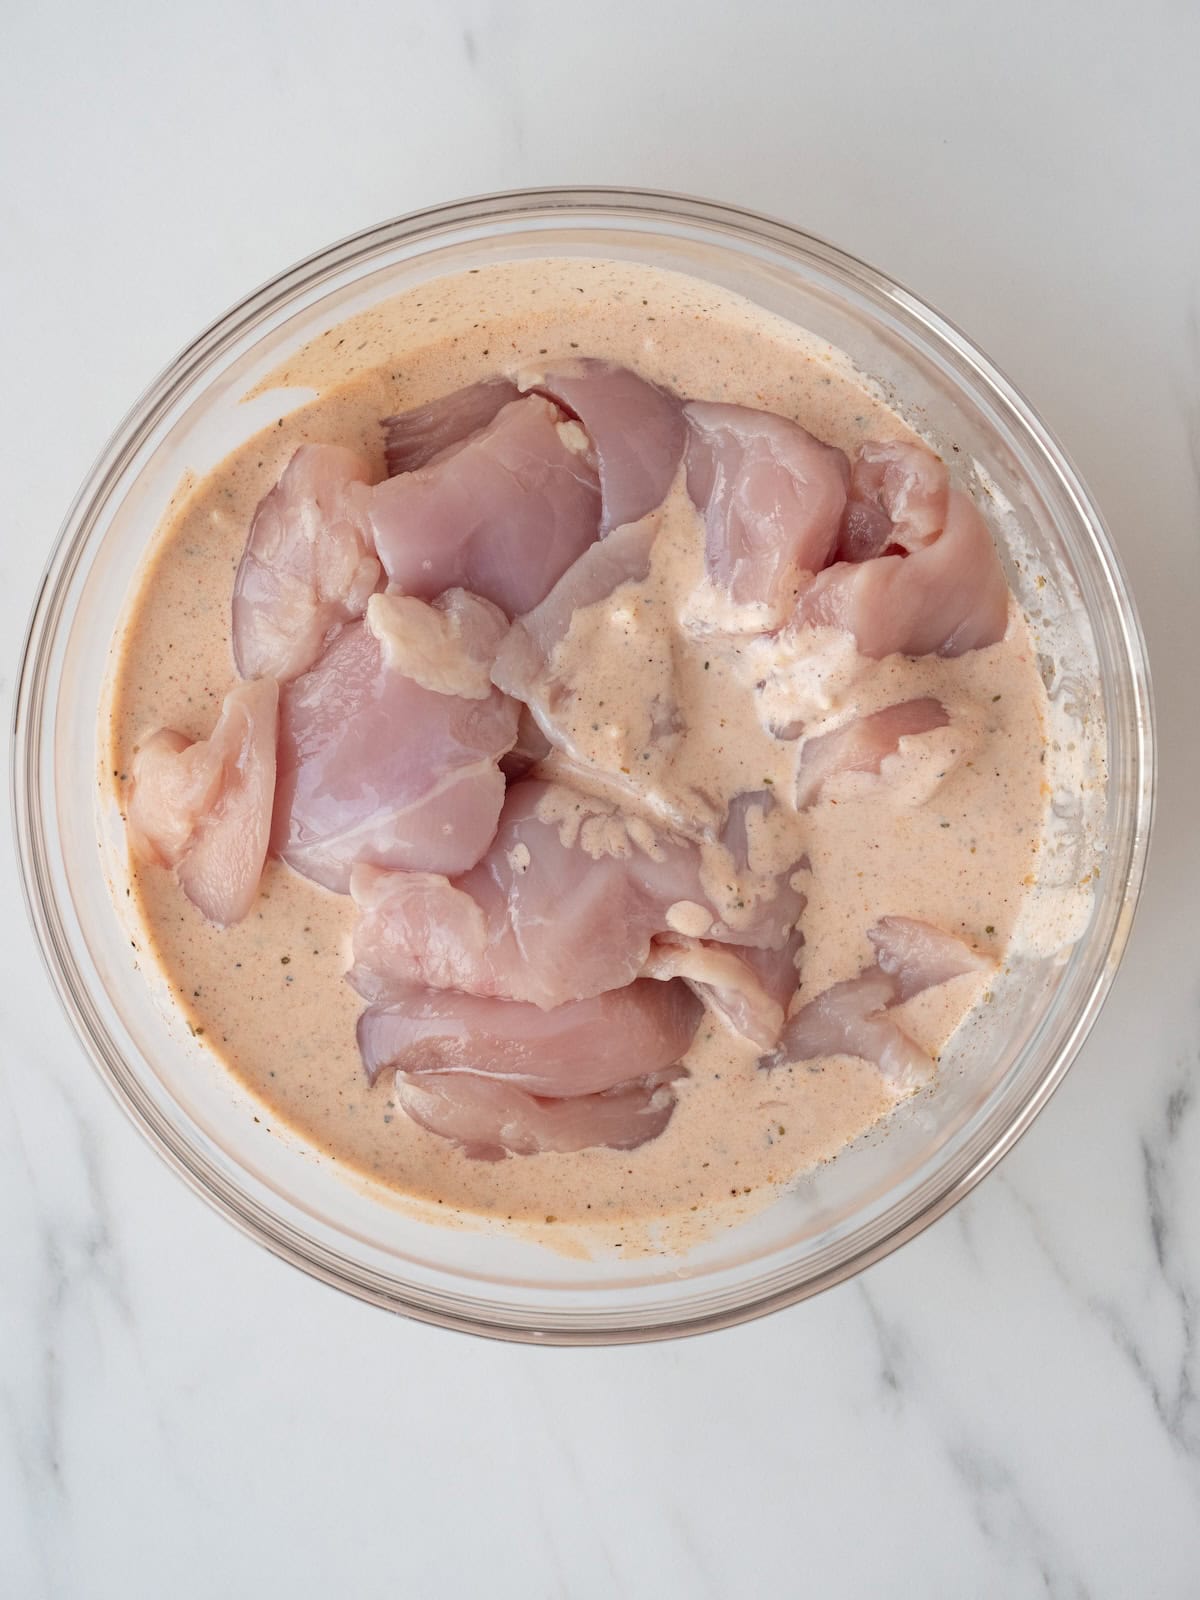 A large glass mixing bowl with a marinade, and chicken breasts cut into chunks added to it.